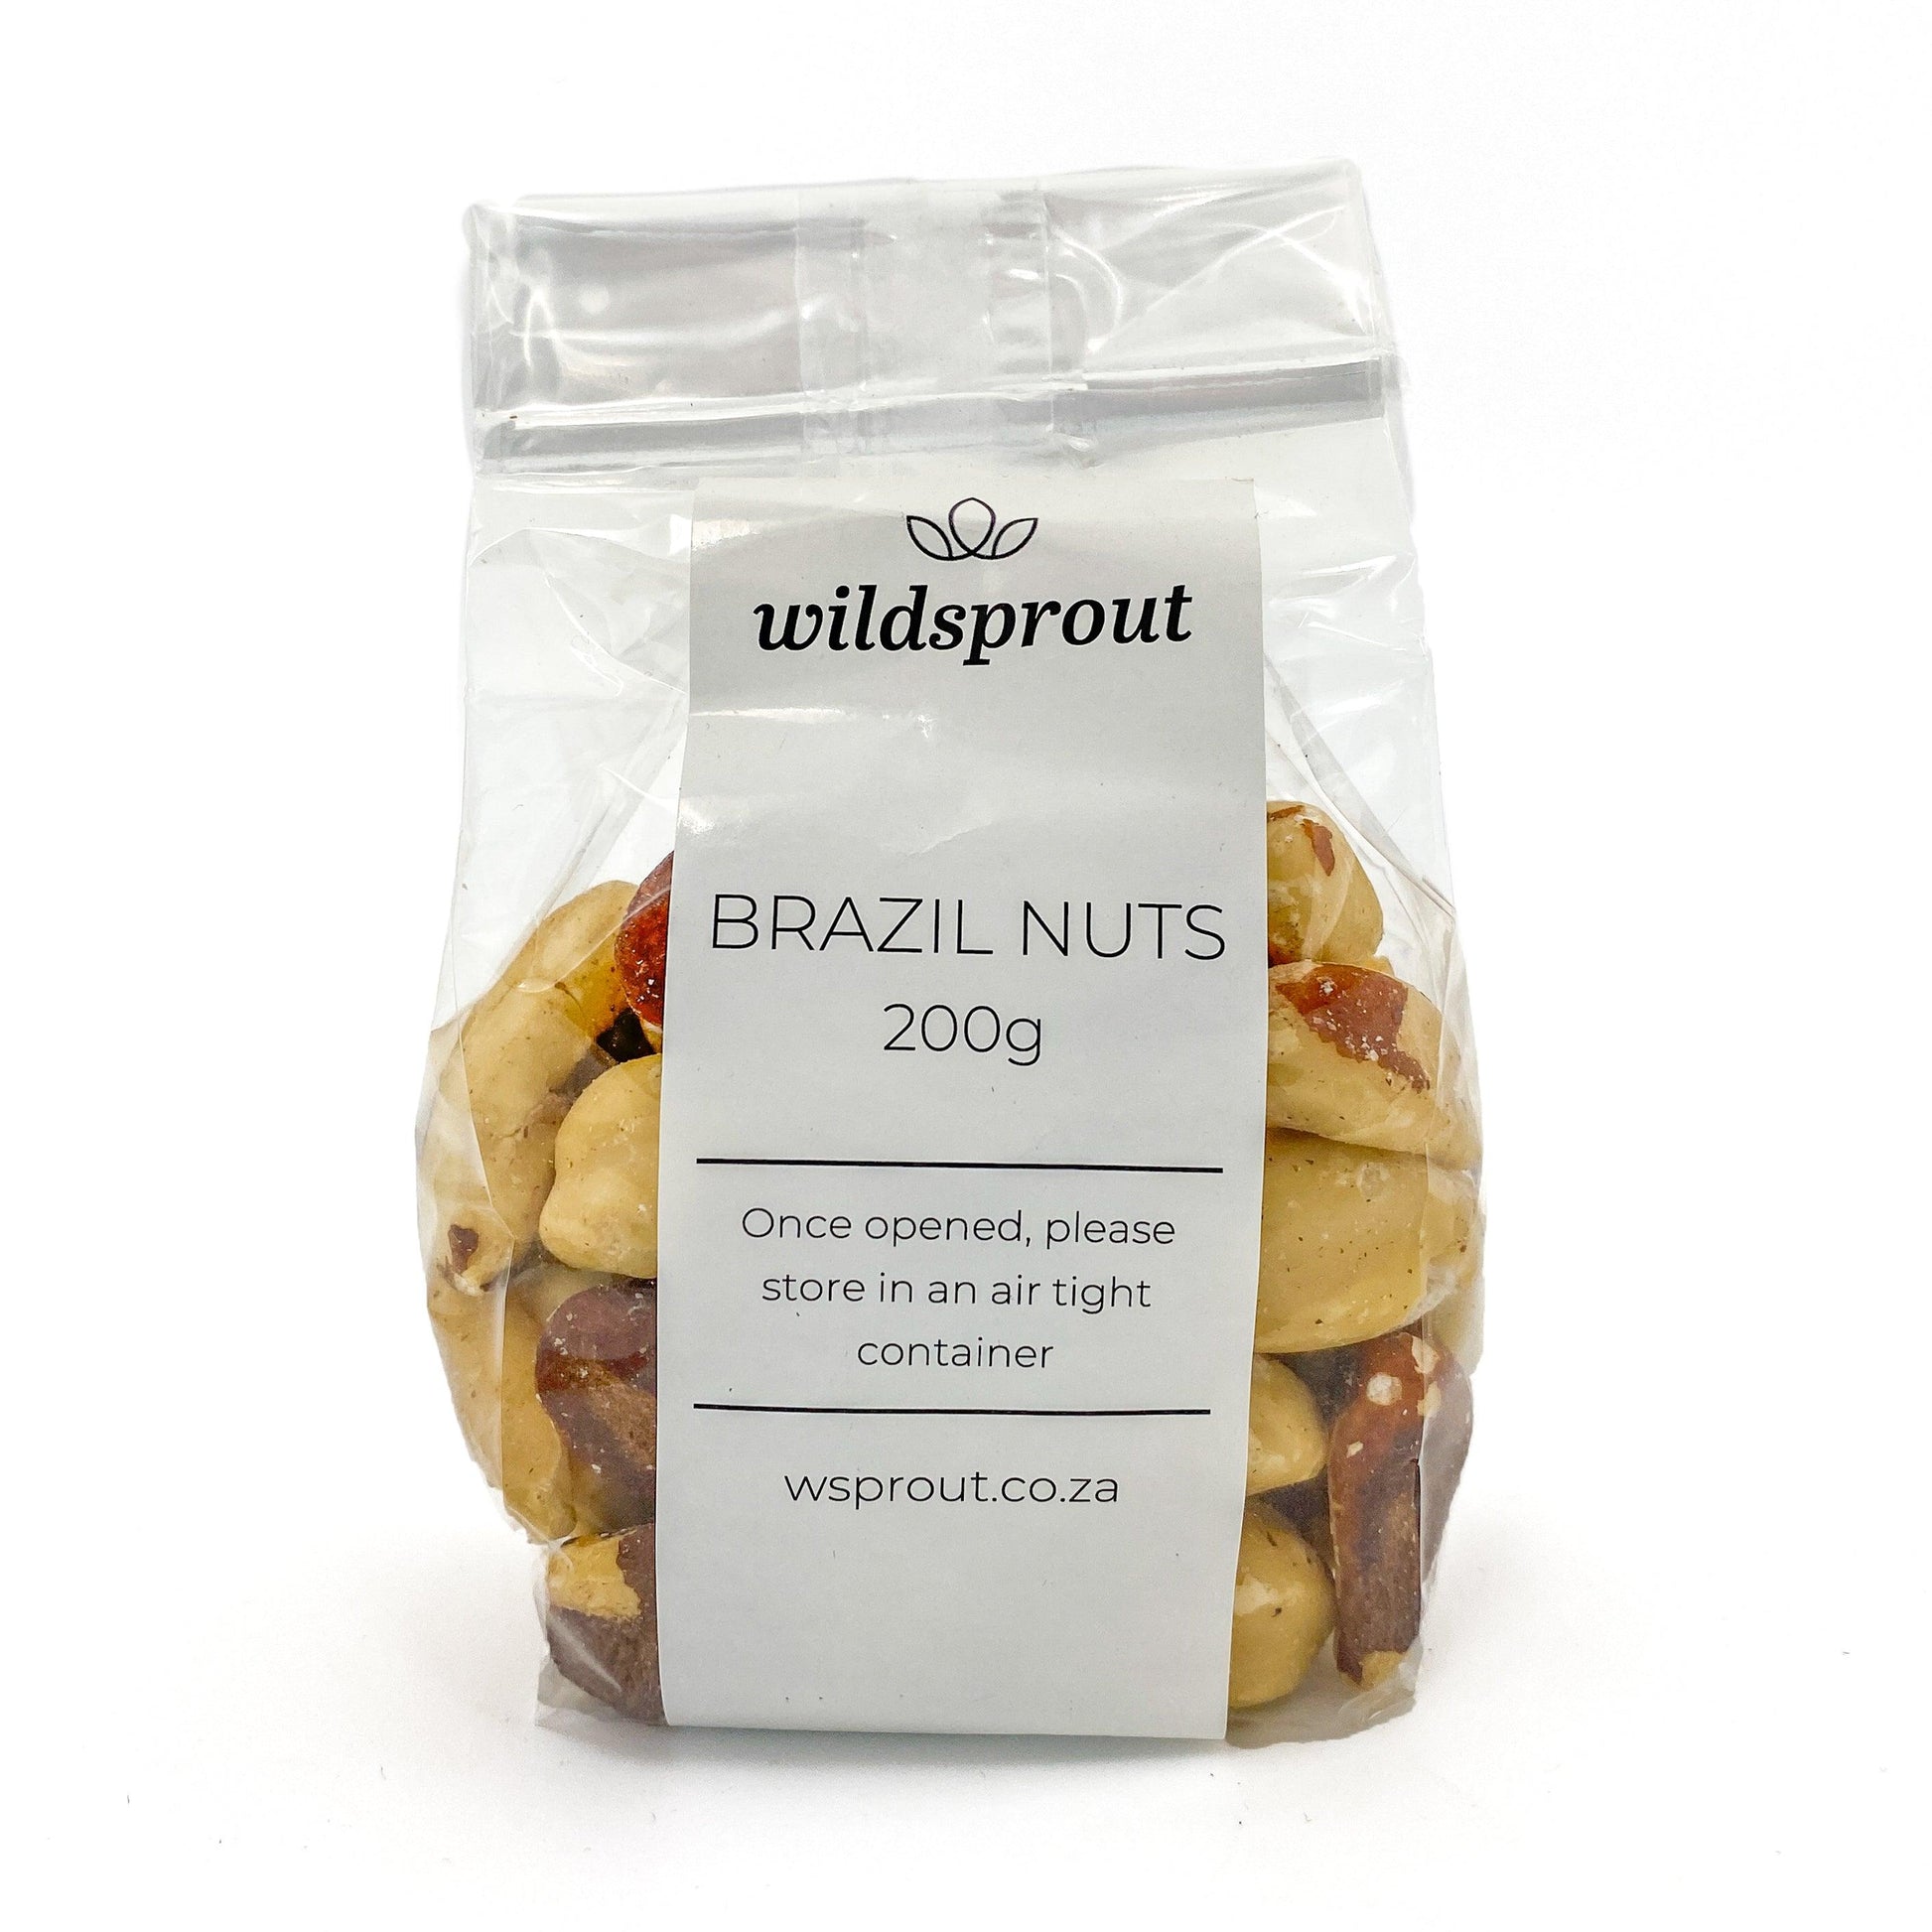 Brazil Nuts 200g - Wildsprout